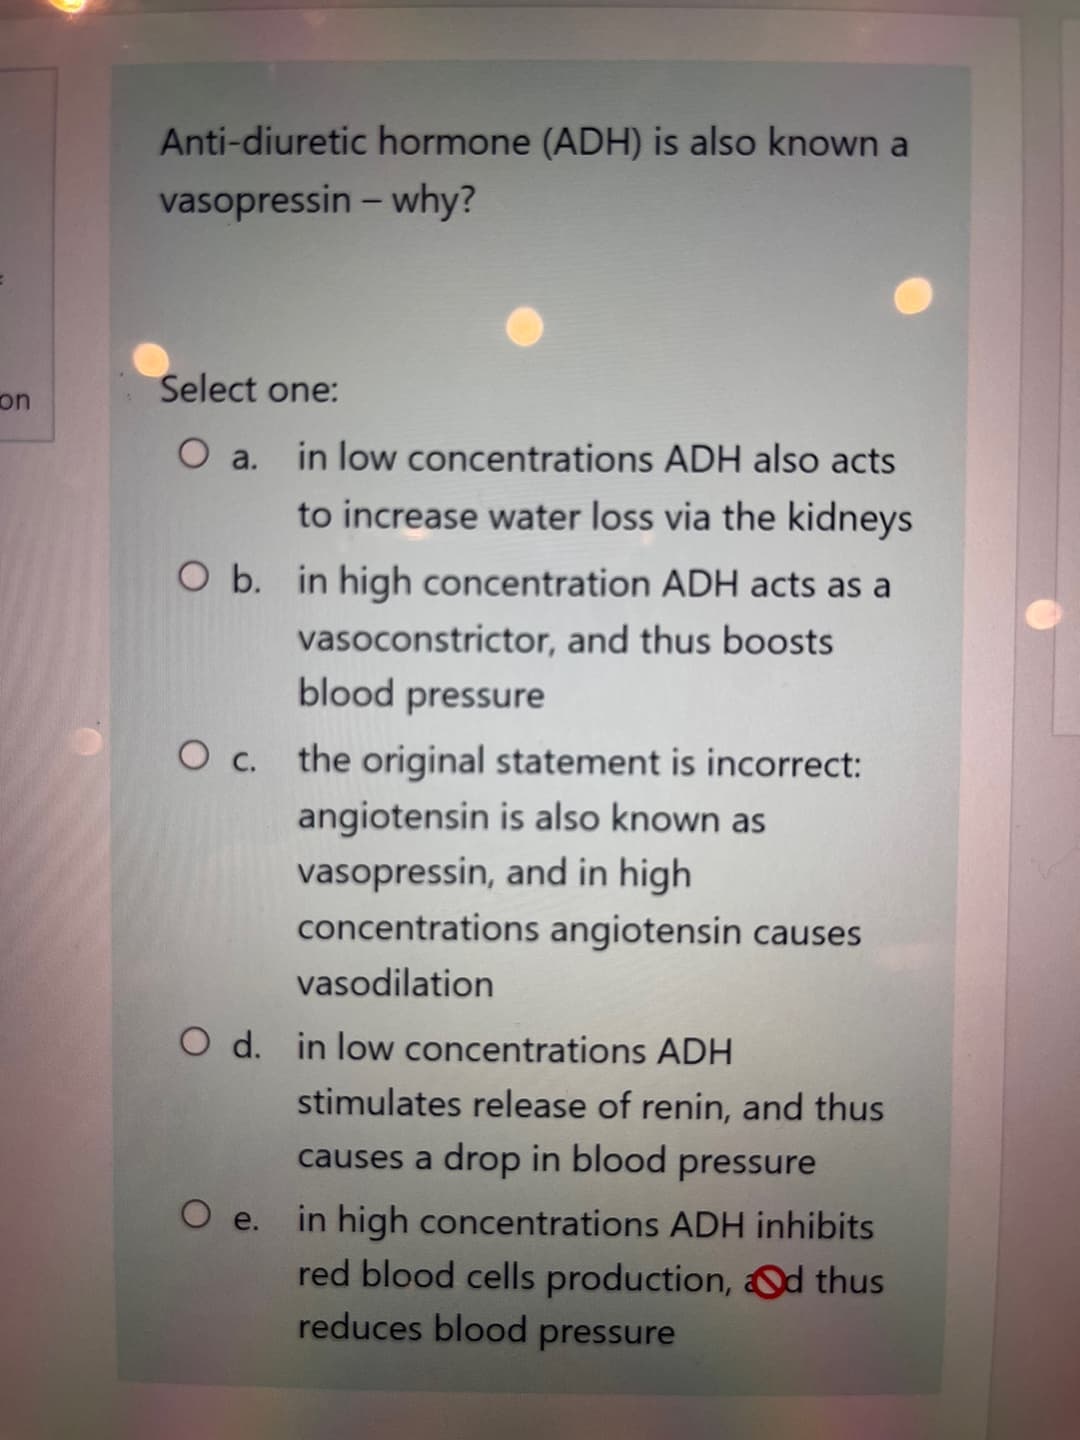 on
Anti-diuretic hormone (ADH) is also known a
vasopressin - why?
Select one:
O a.
in low concentrations ADH also acts
to increase water loss via the kidneys
O b. in high concentration ADH acts as a
vasoconstrictor, and thus boosts
blood pressure
O c.
the original statement is incorrect:
angiotensin is also known as
vasopressin, and in high
concentrations angiotensin causes
vasodilation
O d. in low concentrations ADH
O e.
stimulates release of renin, and thus
causes a drop in blood pressure
in high concentrations ADH inhibits
red blood cells production, Od thus
reduces blood pressure